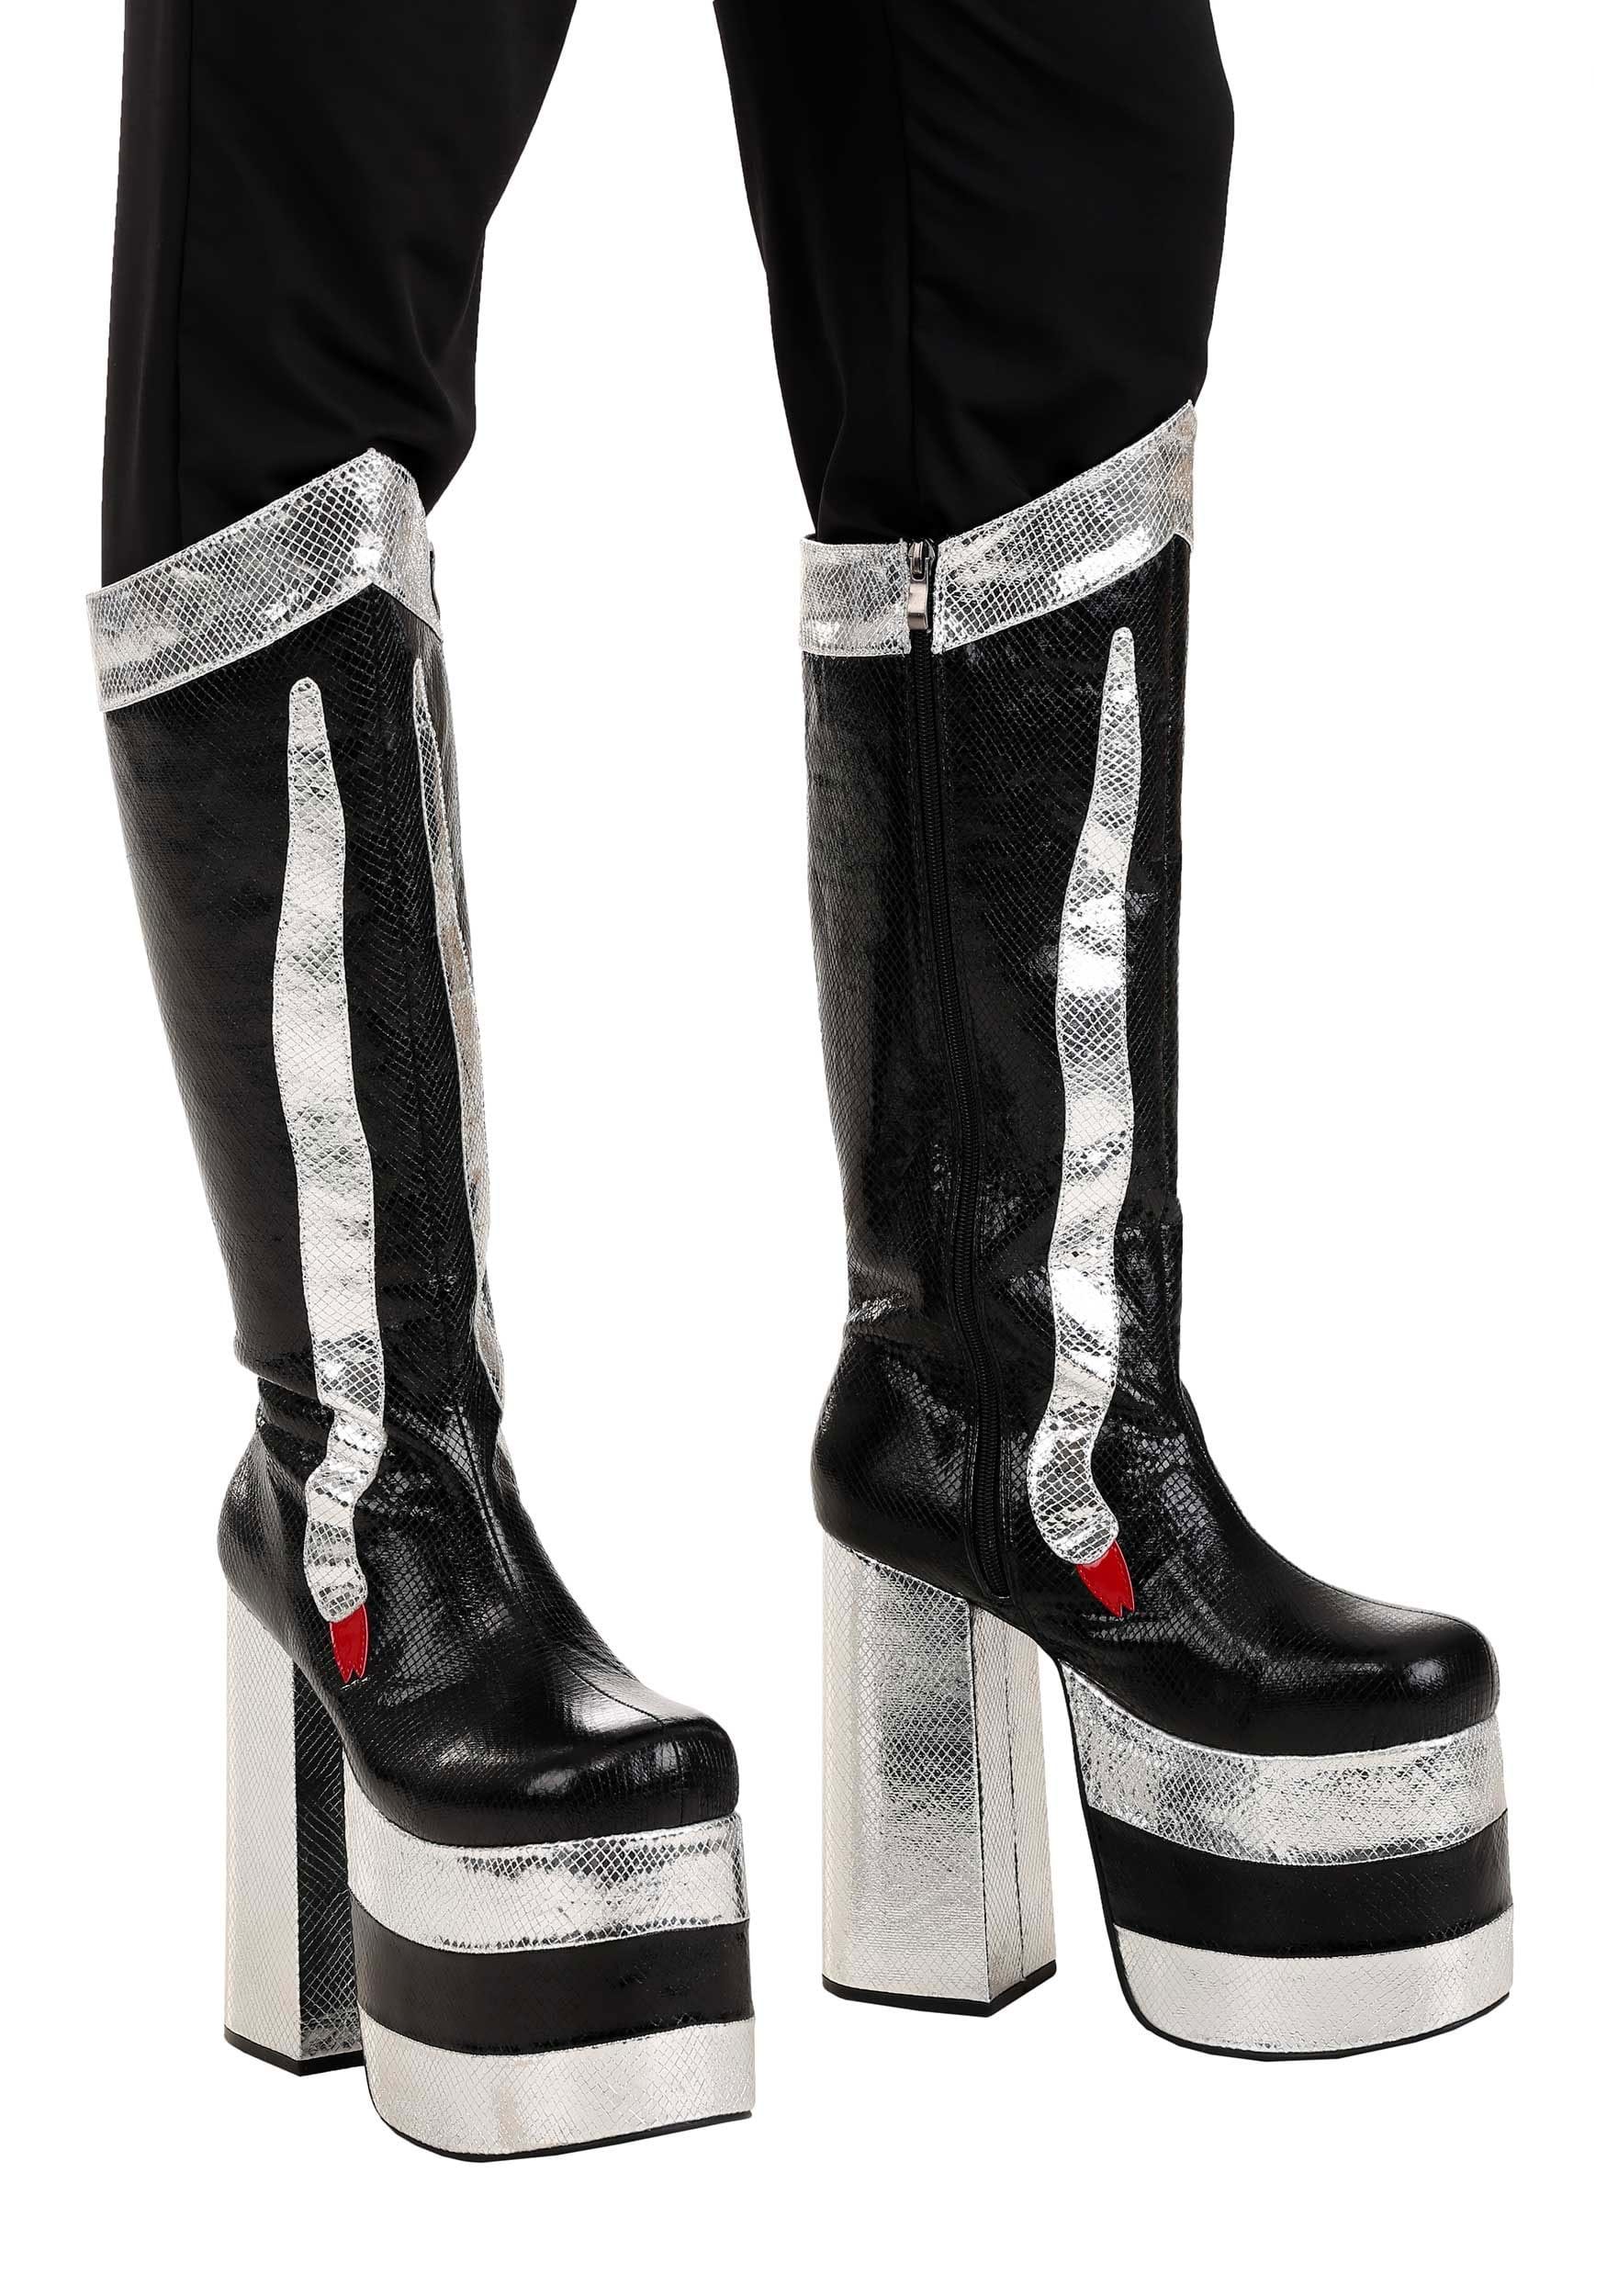 Image of FUN Costumes KISS Catman Boots